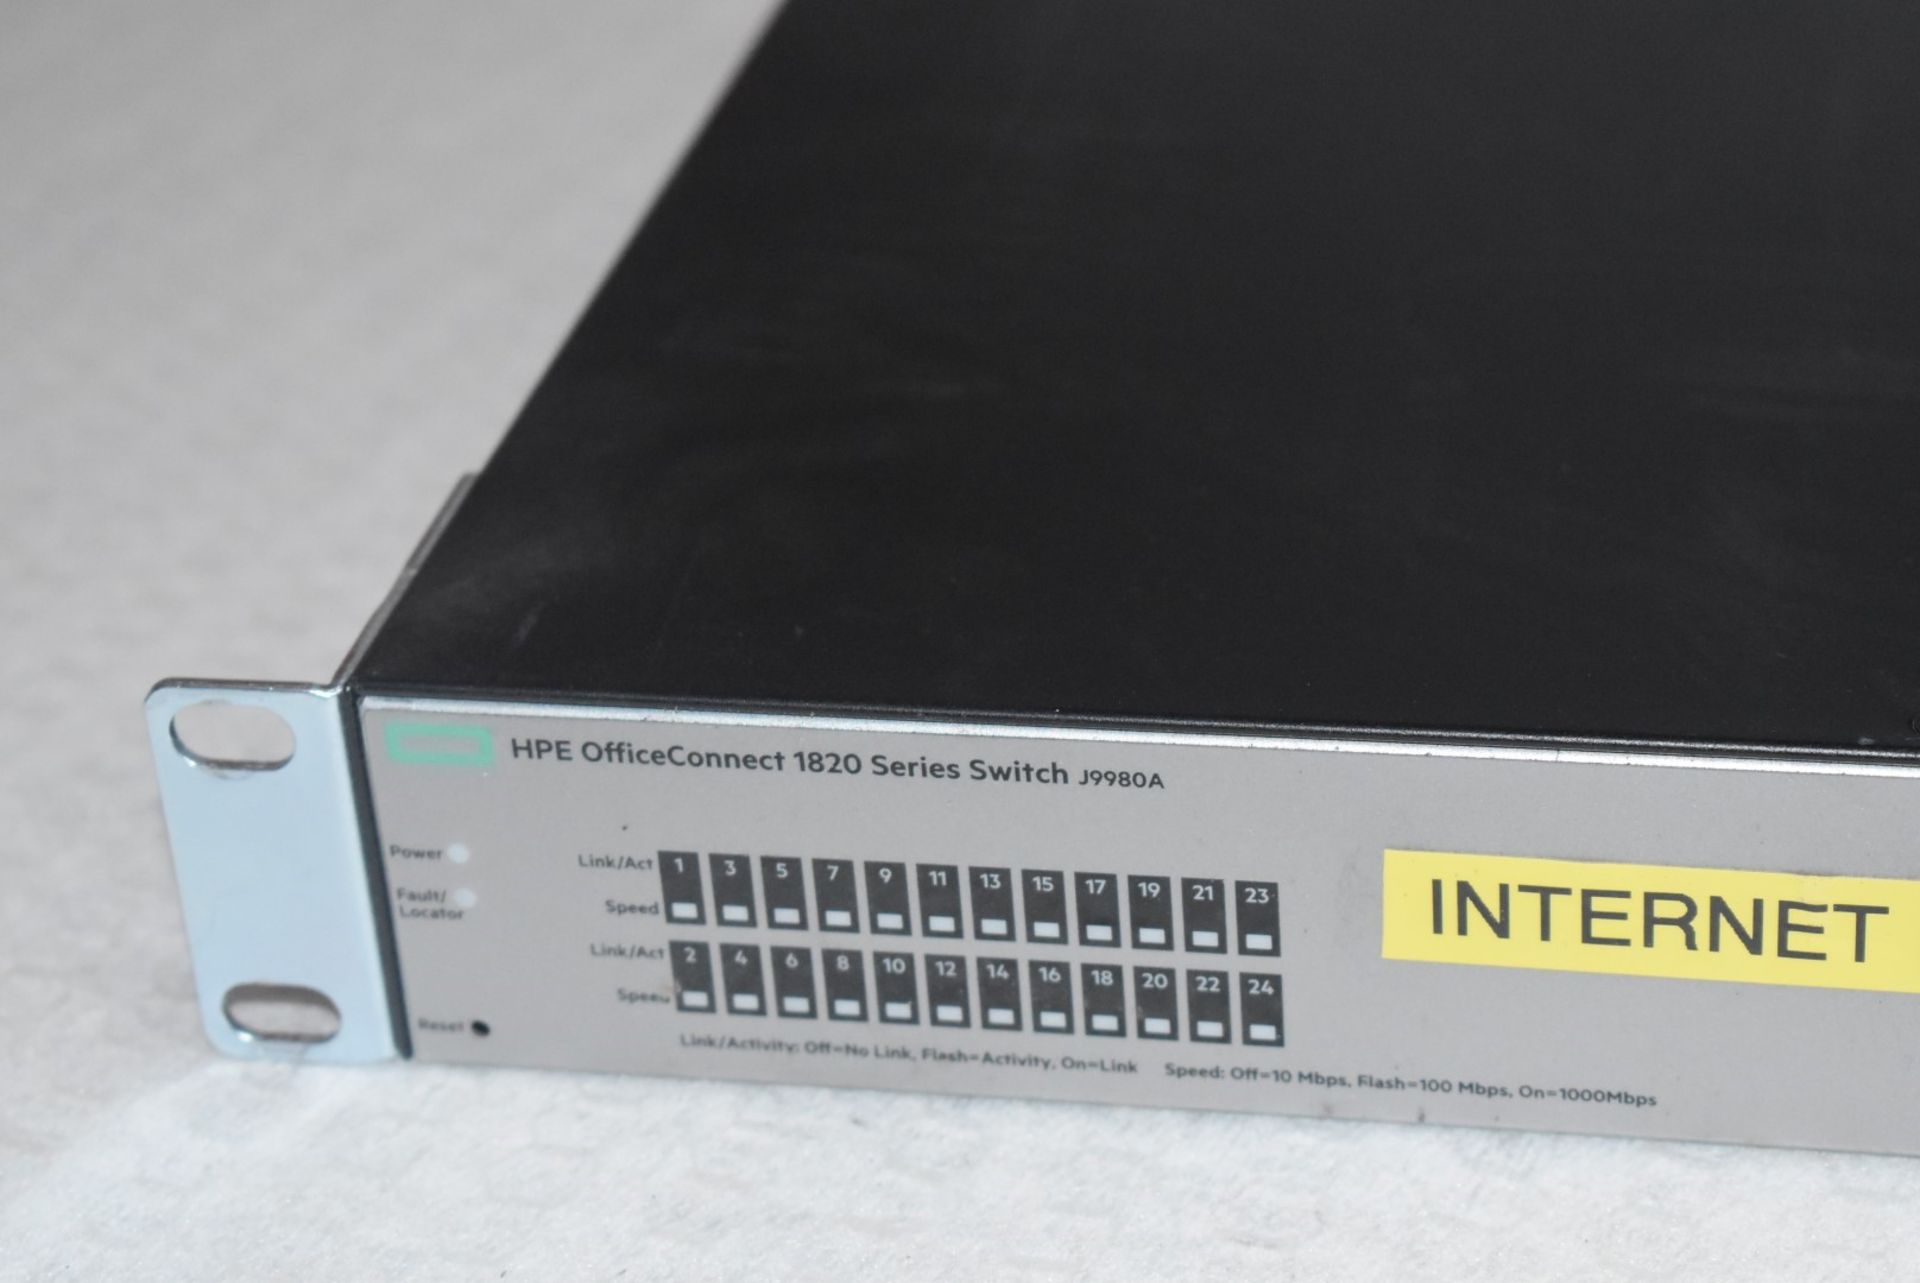 1 x HP Office Connect 1820 Series 24 Port Switch - Type J9980A - Image 3 of 4